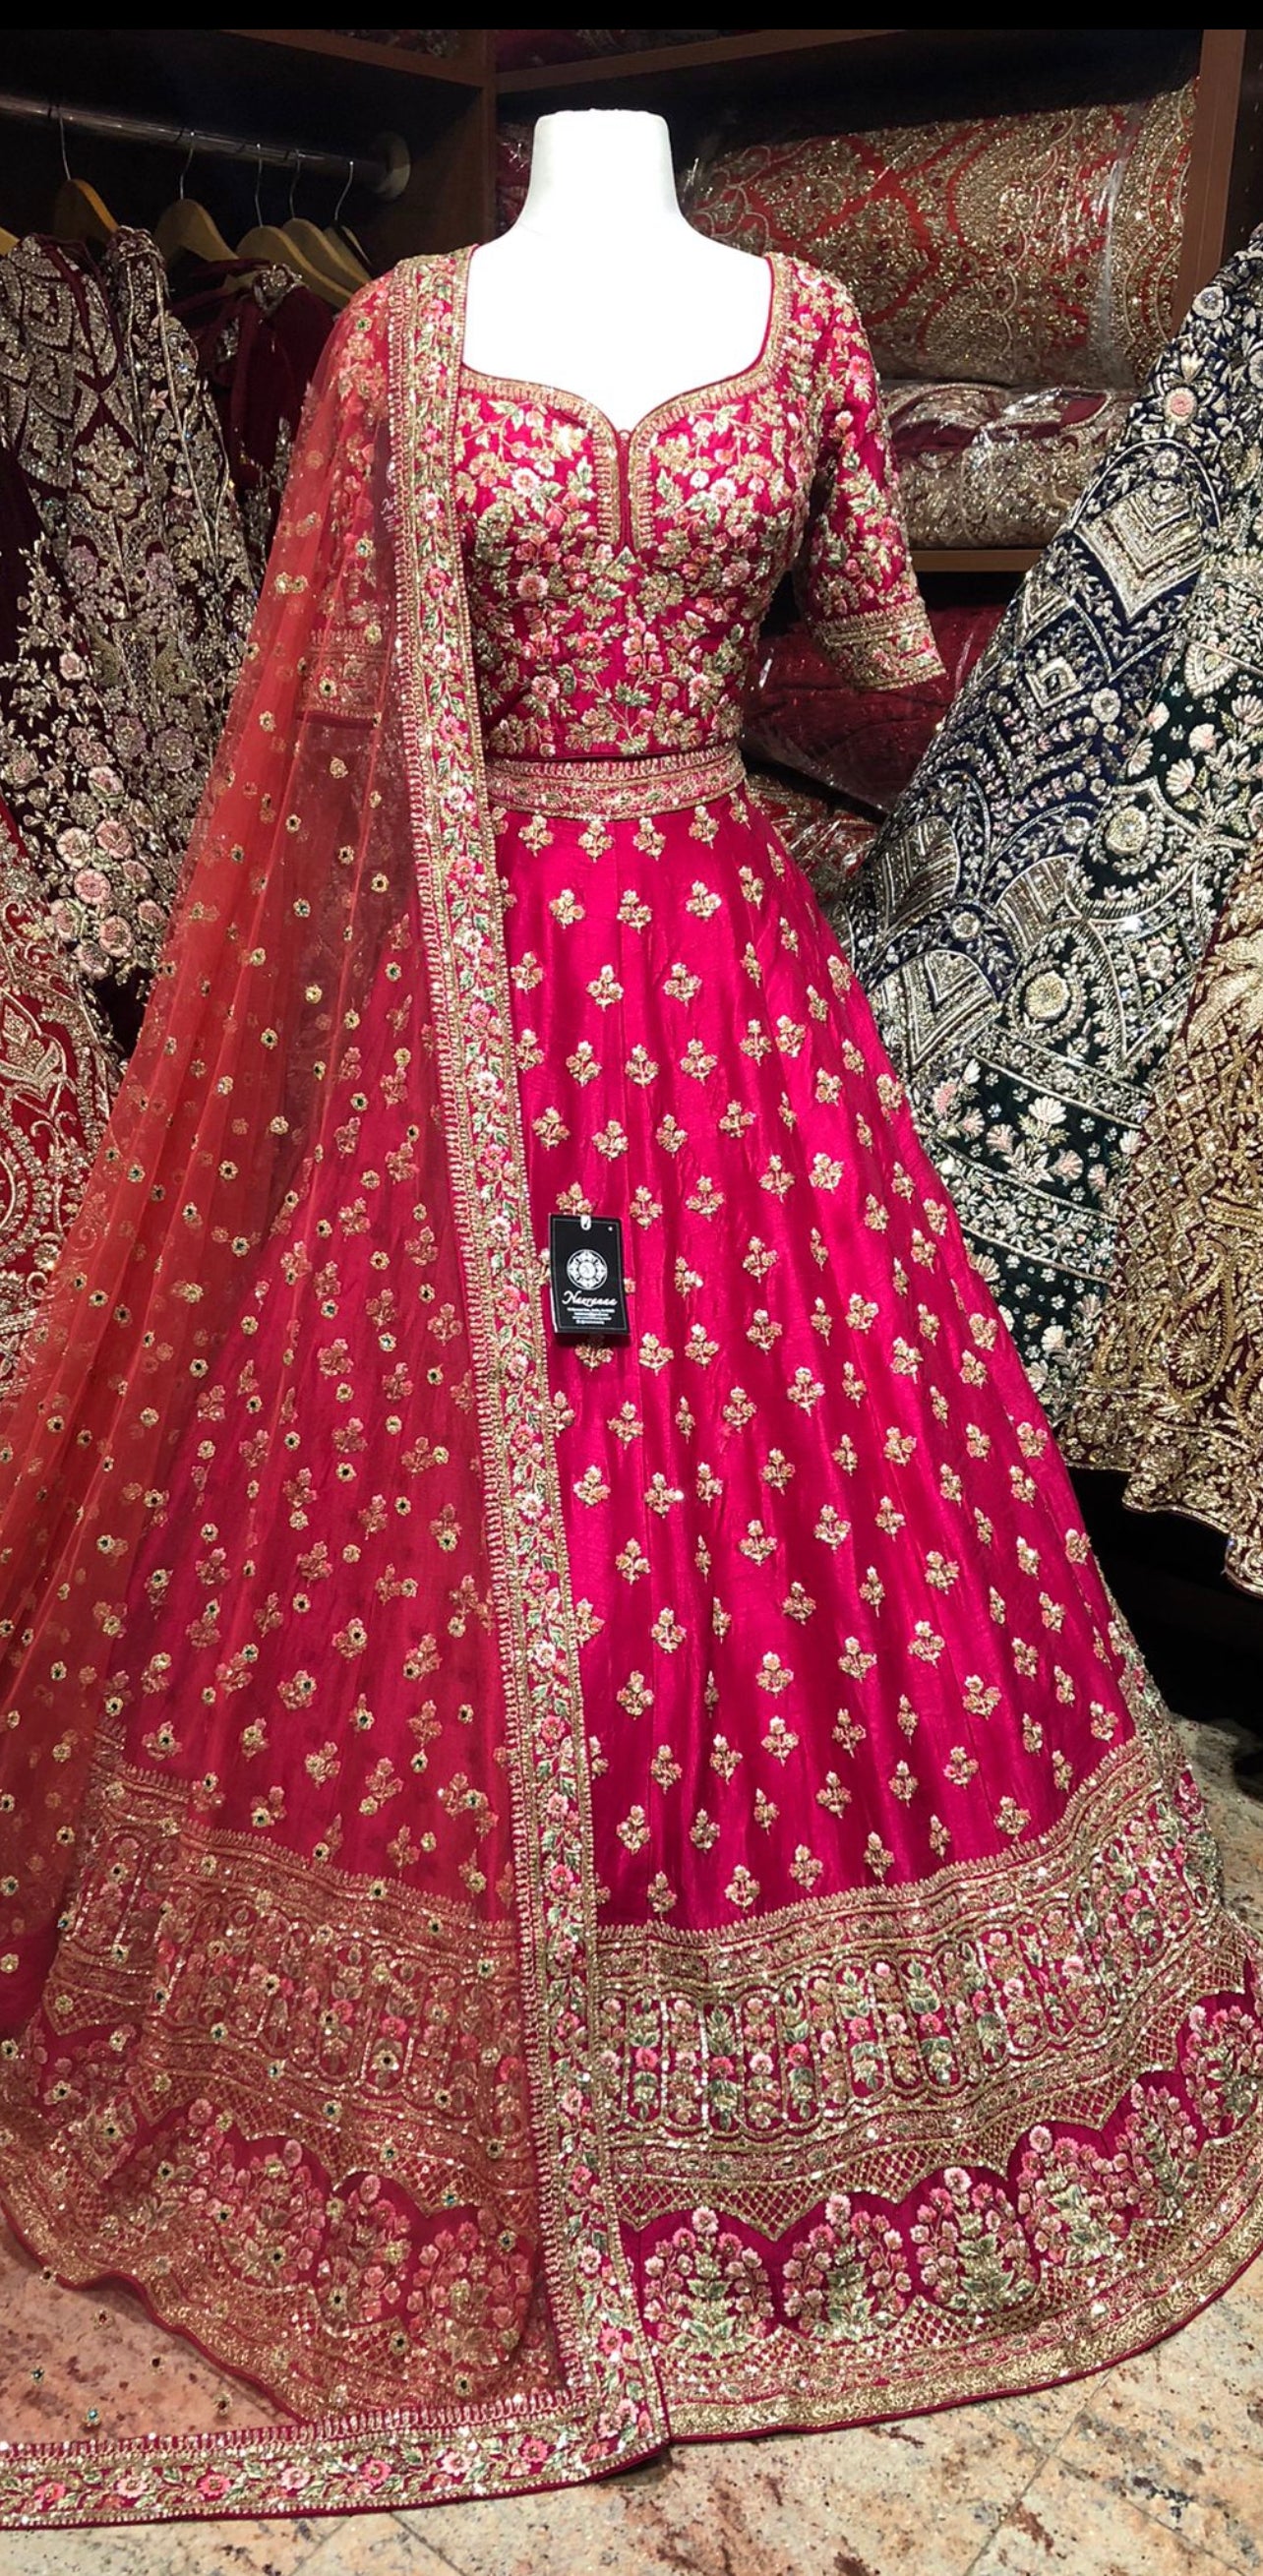 Mumtaz – Meticulously crafted lehenga choli ensemble in a vibrant tangerine red  color. Embellished fully with oxidized antique gold wor... | Instagram